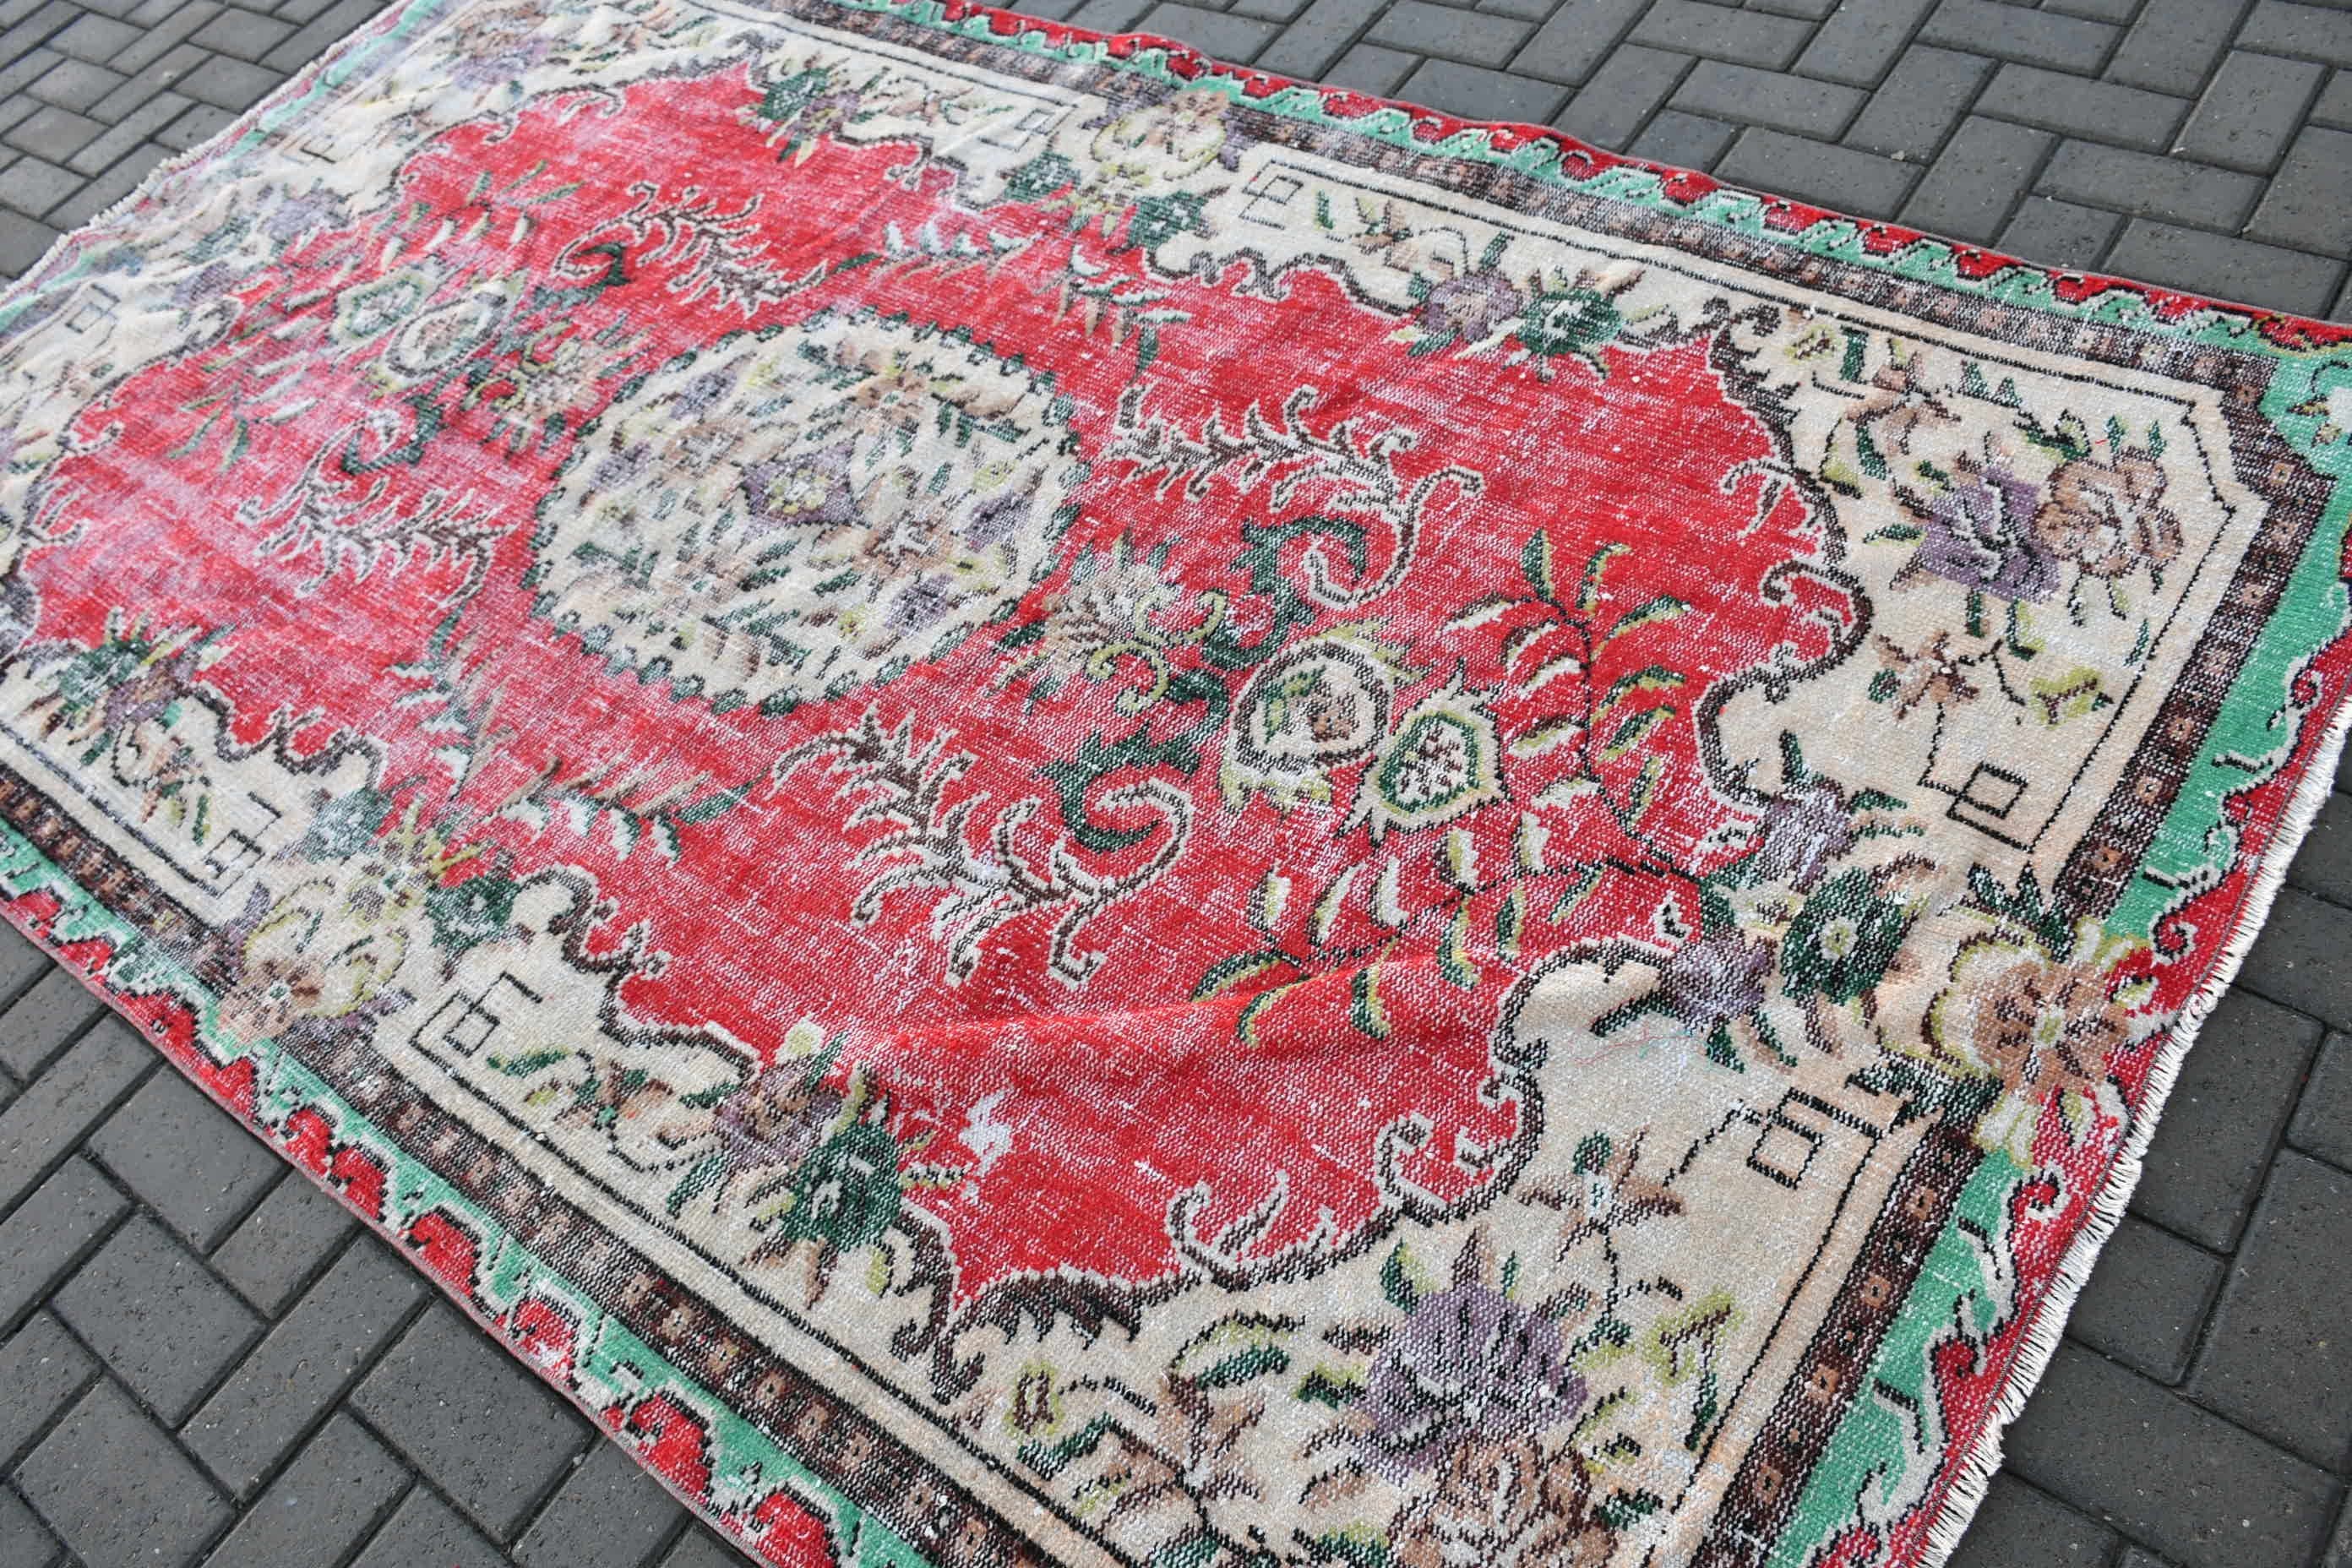 Home Decor Rug, Living Room Rug, Moroccan Rug, 5.4x8.9 ft Large Rugs, Dining Room Rugs, Vintage Rugs, Turkish Rugs, Red Moroccan Rug